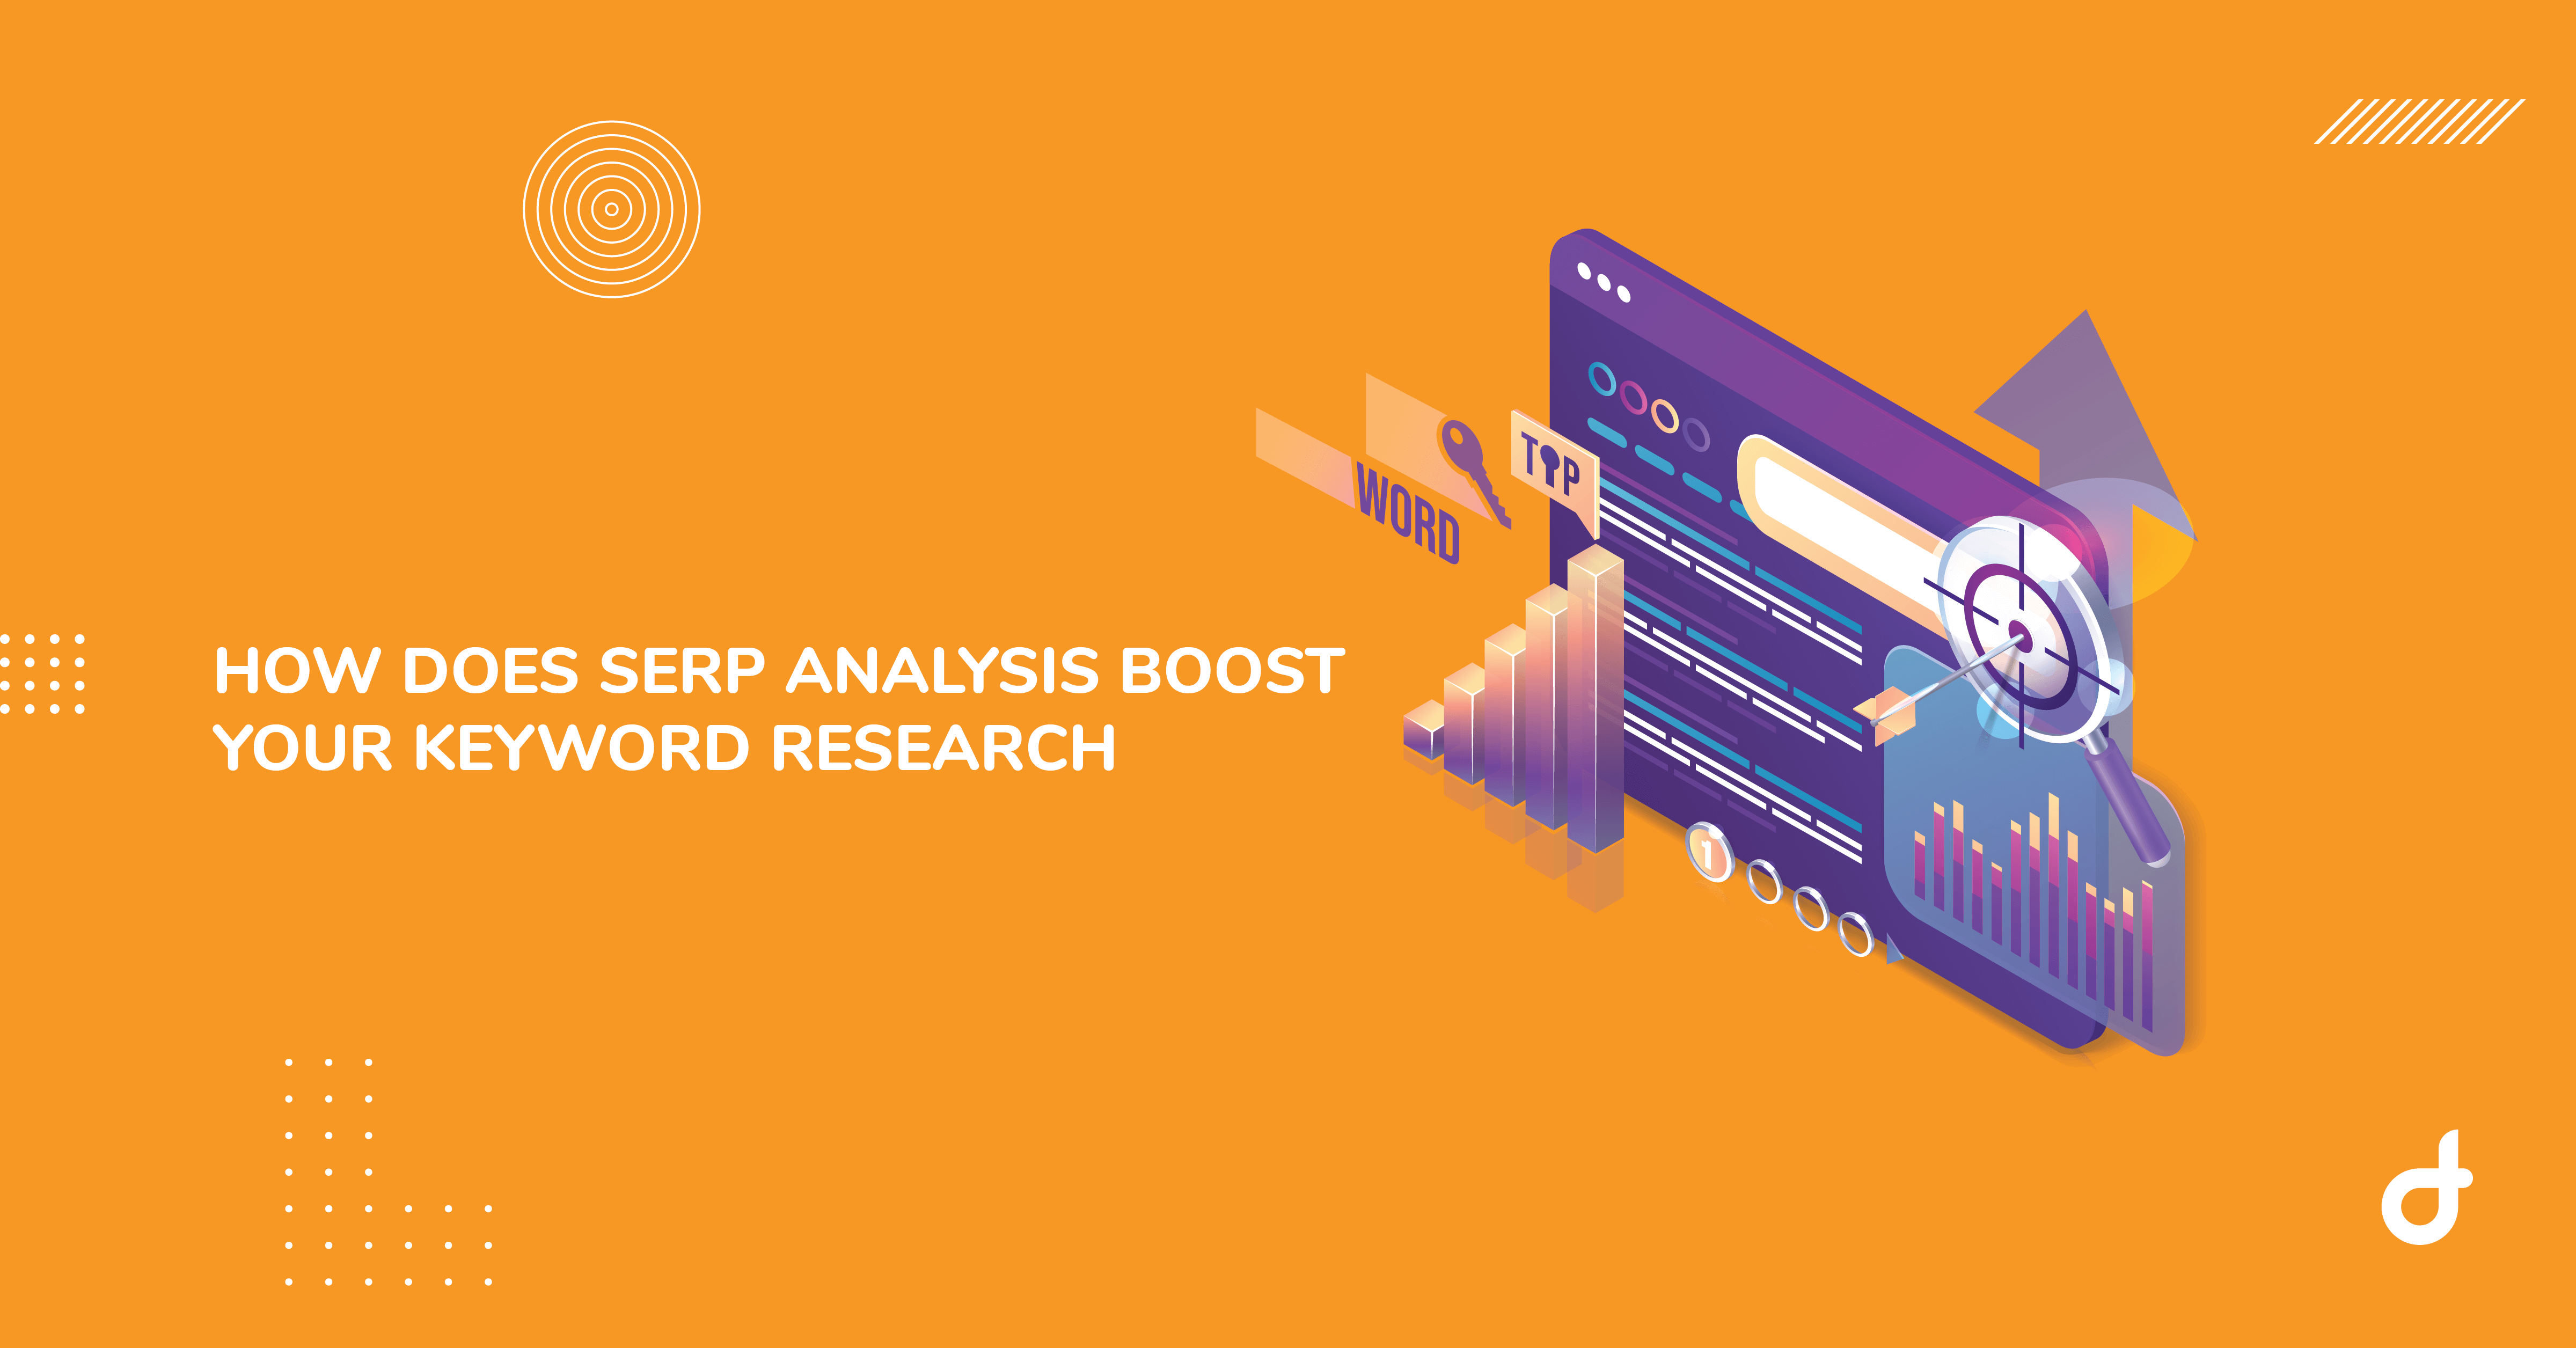 how does serp analysis boost your keyword research?